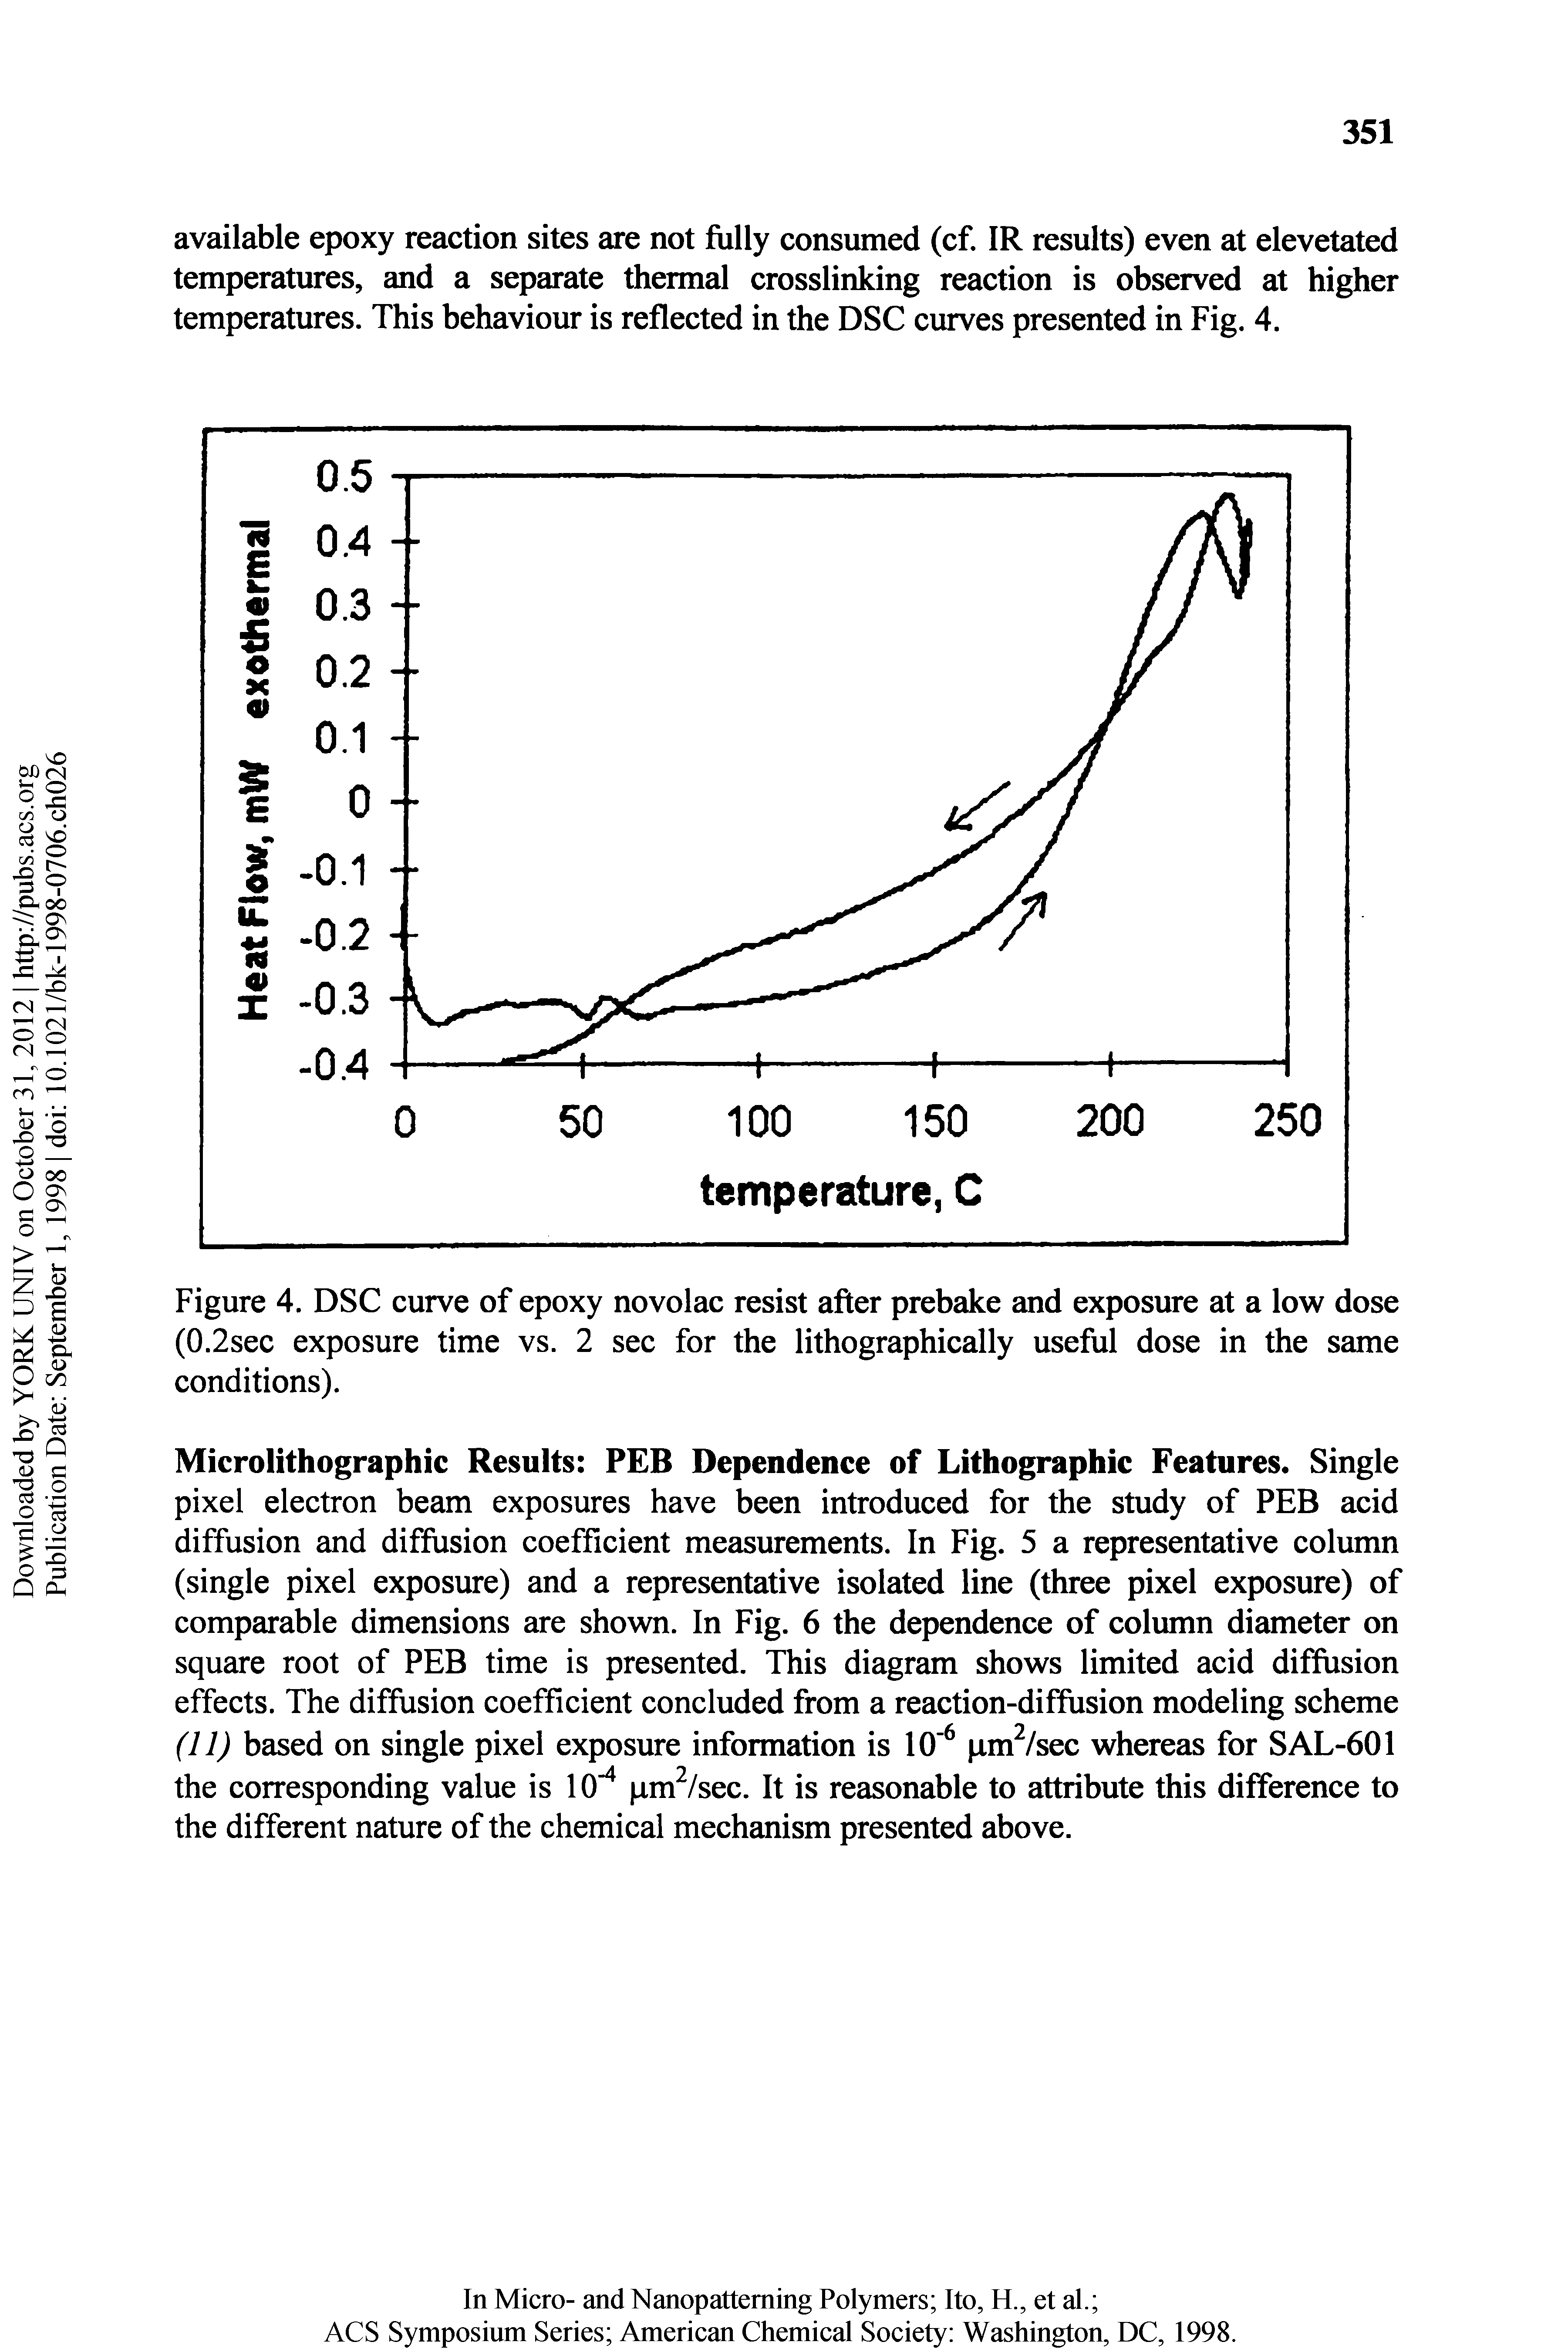 Figure 4. DSC curve of epoxy novolac resist after prebake and exposure at a low dose (0.2sec exposure time vs. 2 sec for the lithographically useful dose in the same conditions).